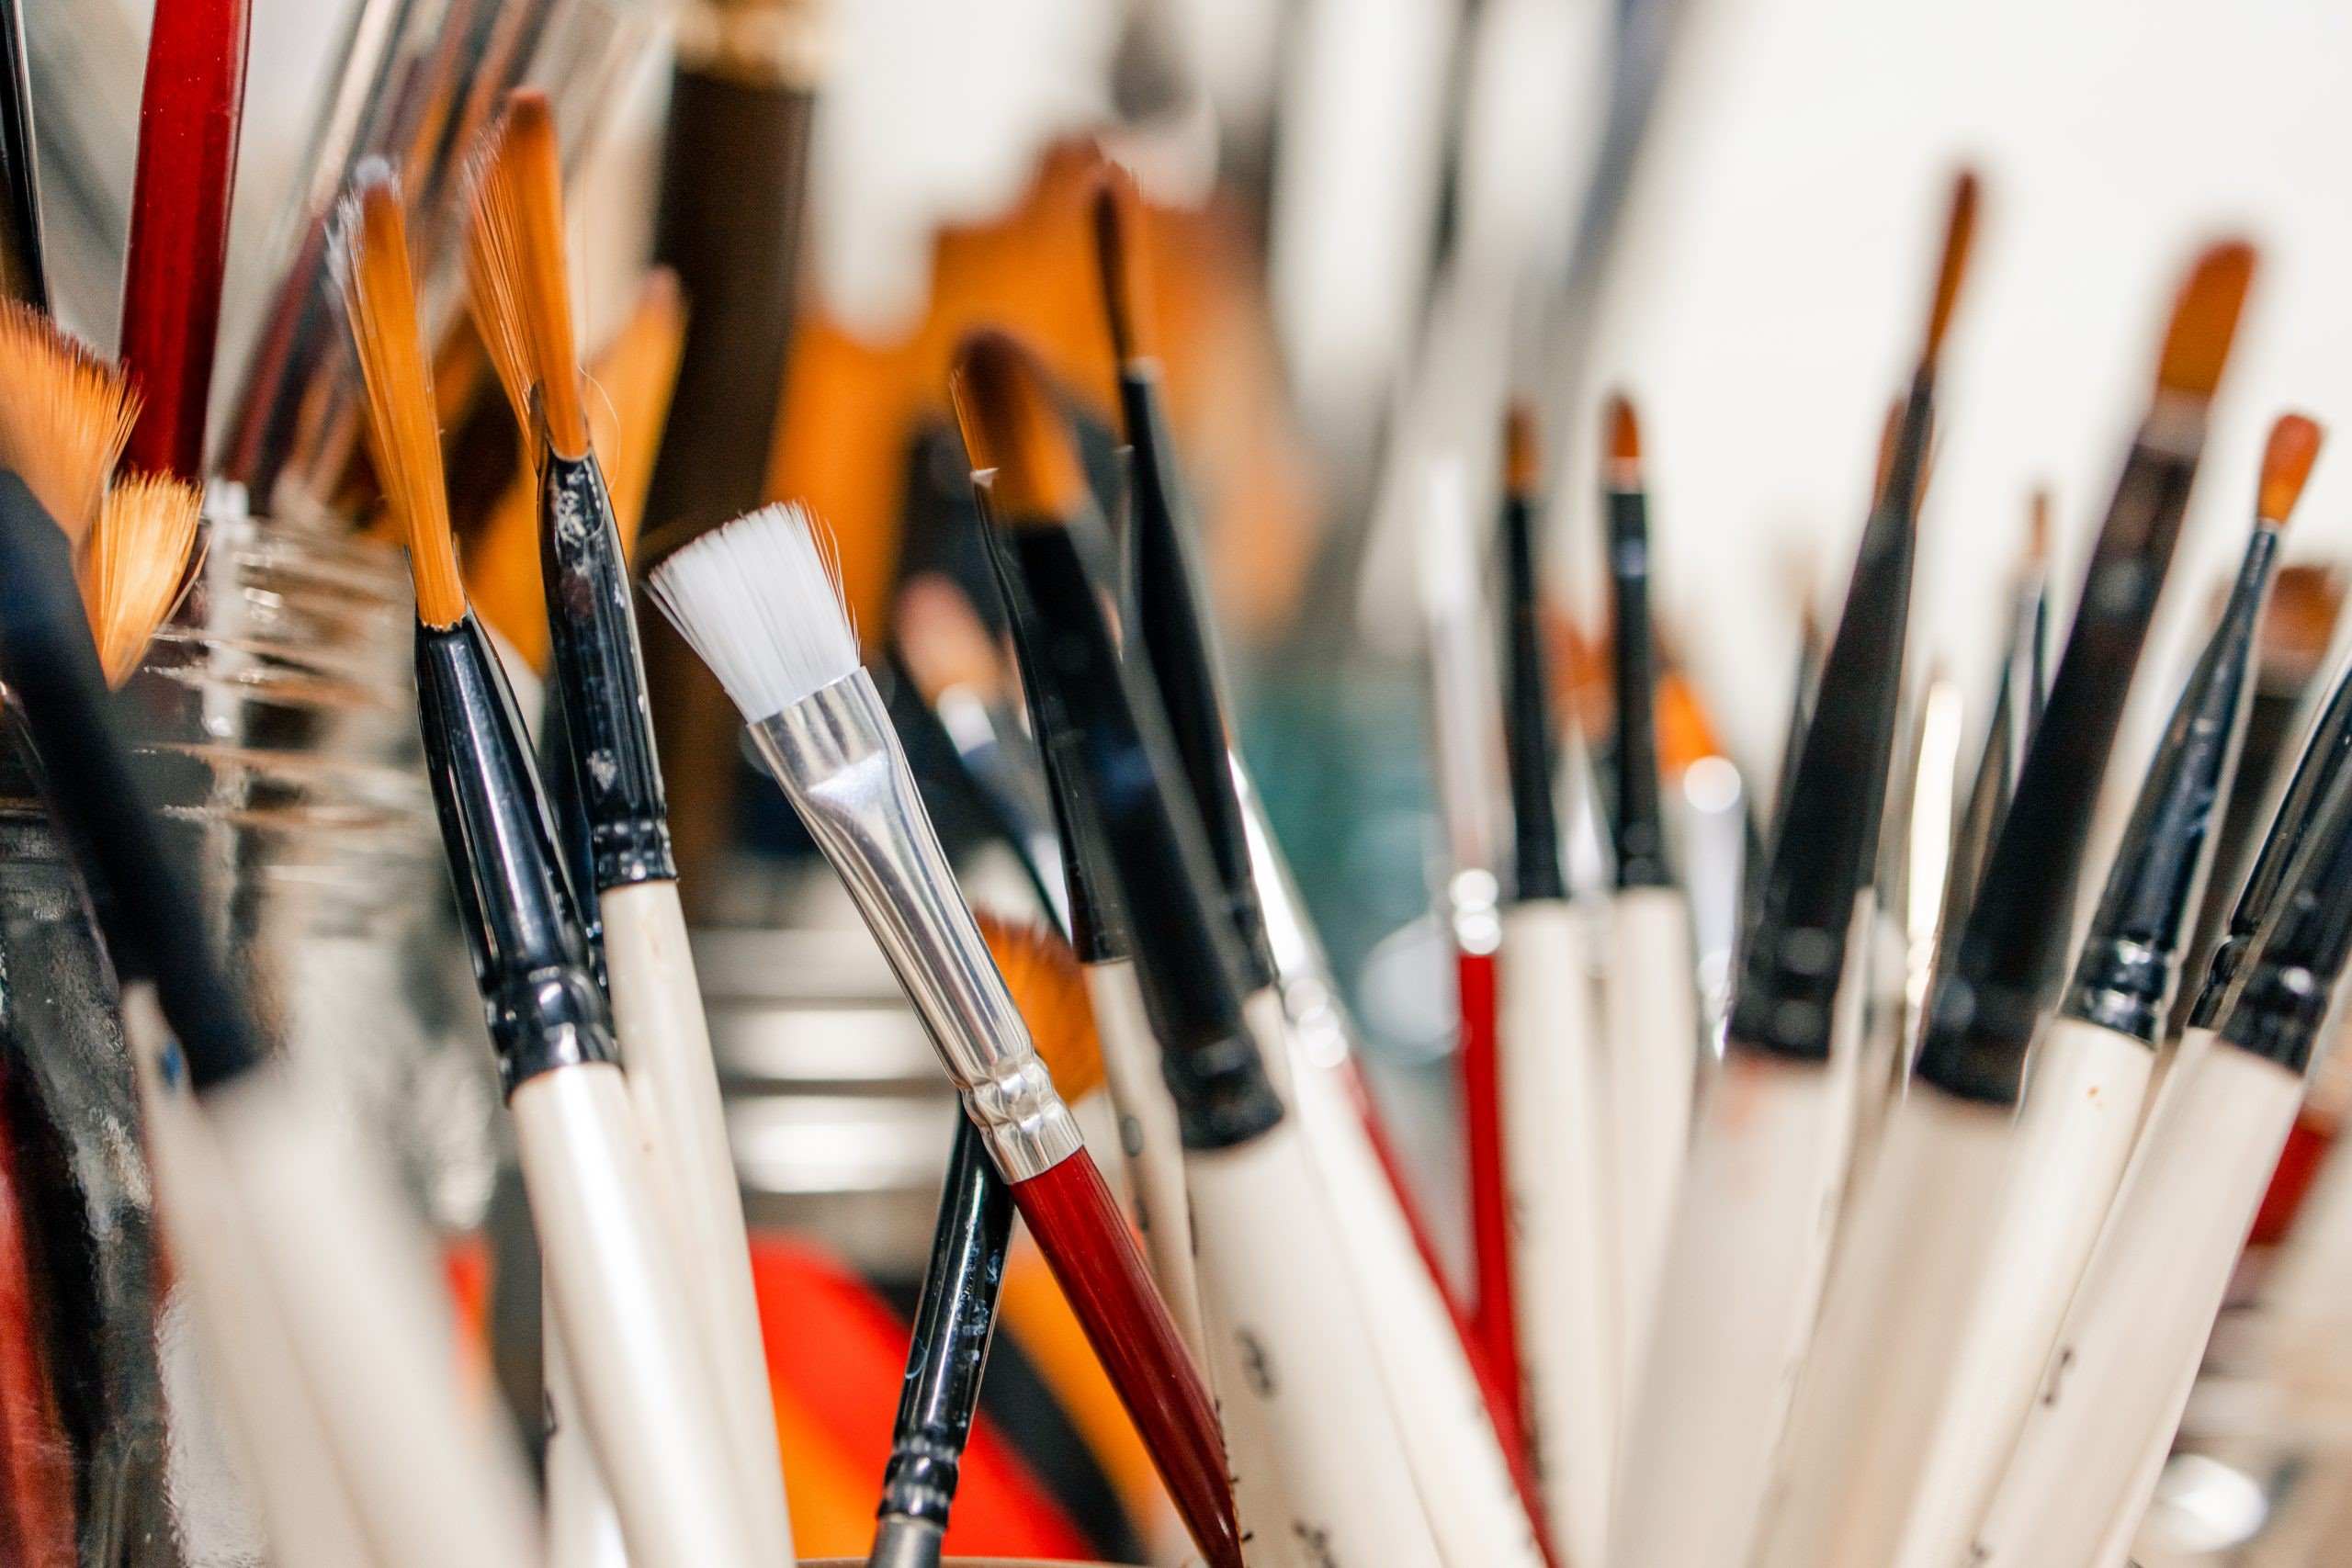 How To Clean Oil Based Paint Brushes